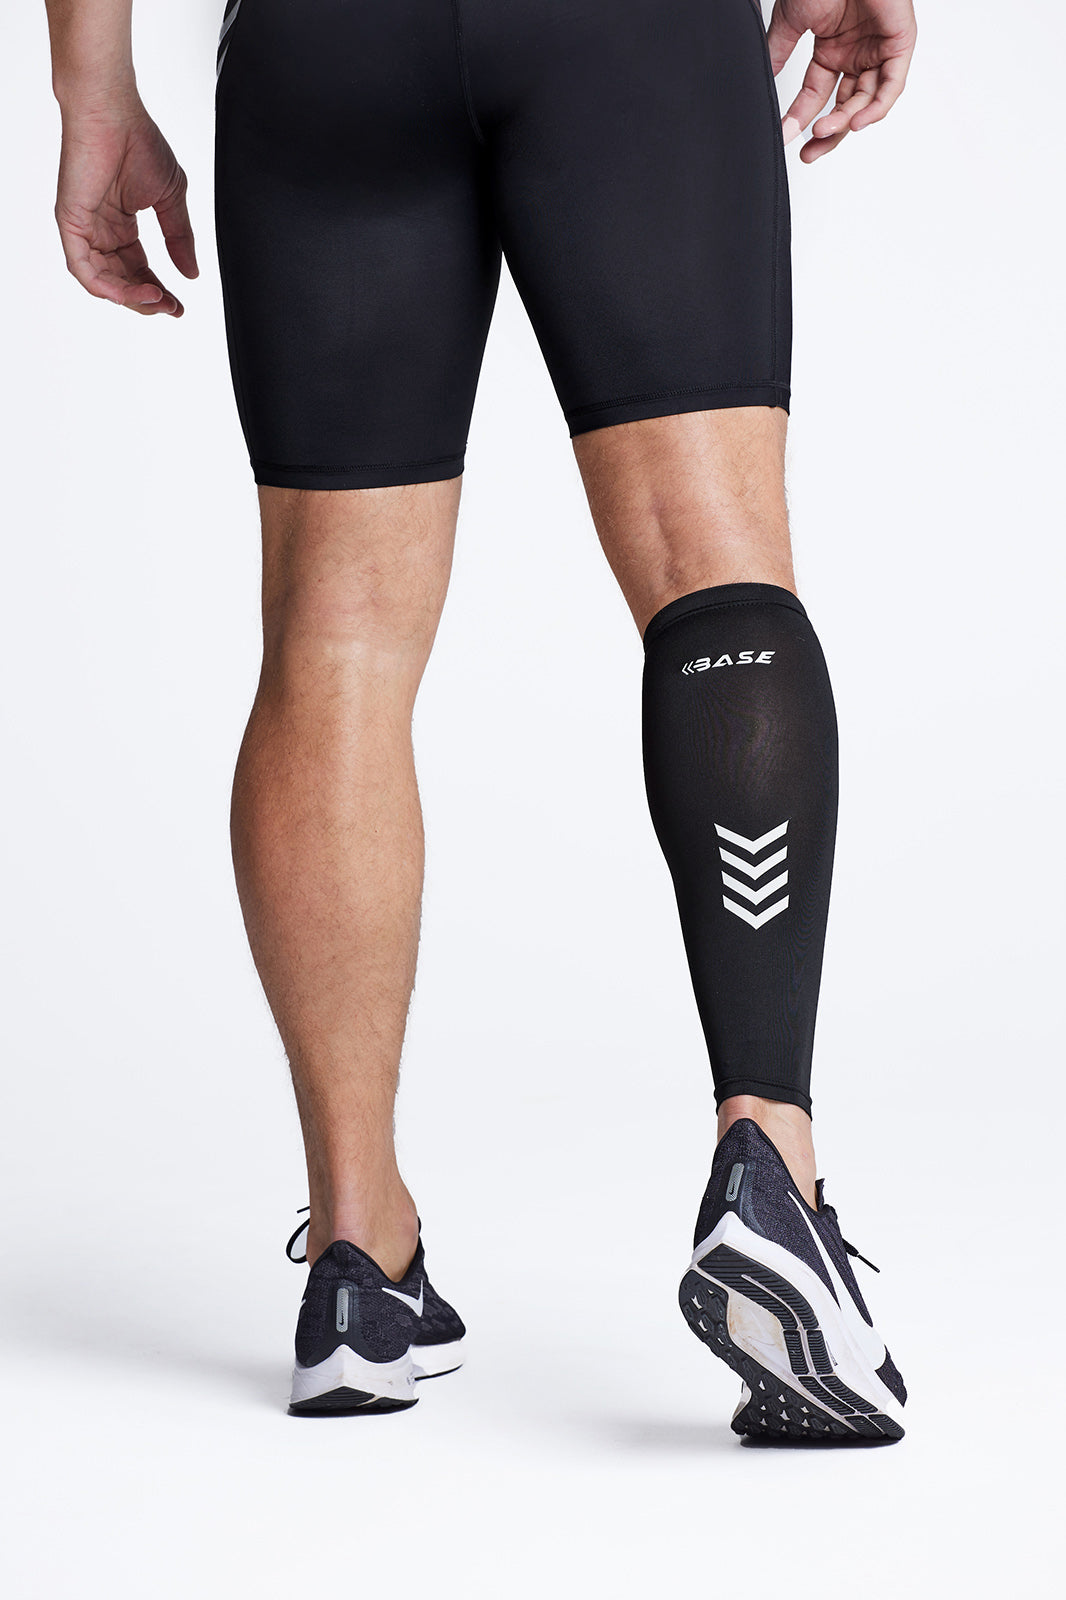 Buy Adidas Compression Calf Sleeves - Black - L/XL Online at Best